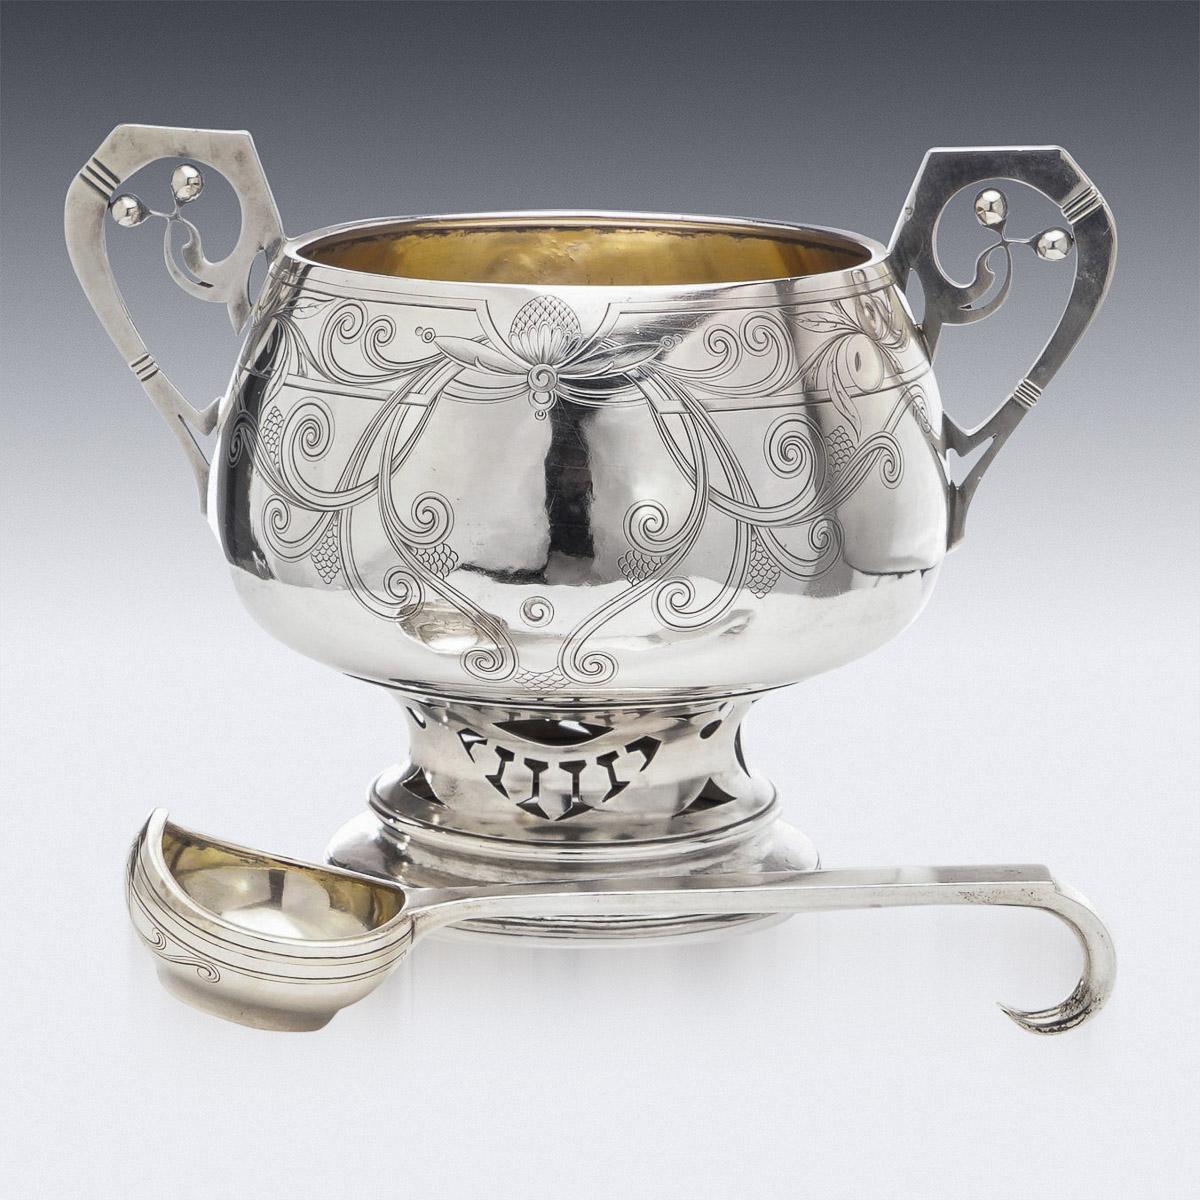 20th Century Imperial Russian Pan Slavic style silver punch bowl and ladle, body mounted with an elaborately designed Pan-Slavic handles and a wide shaped stand, richly gilt interior. Hallmarked Russian silver 84 (875 standard), Moscow, year